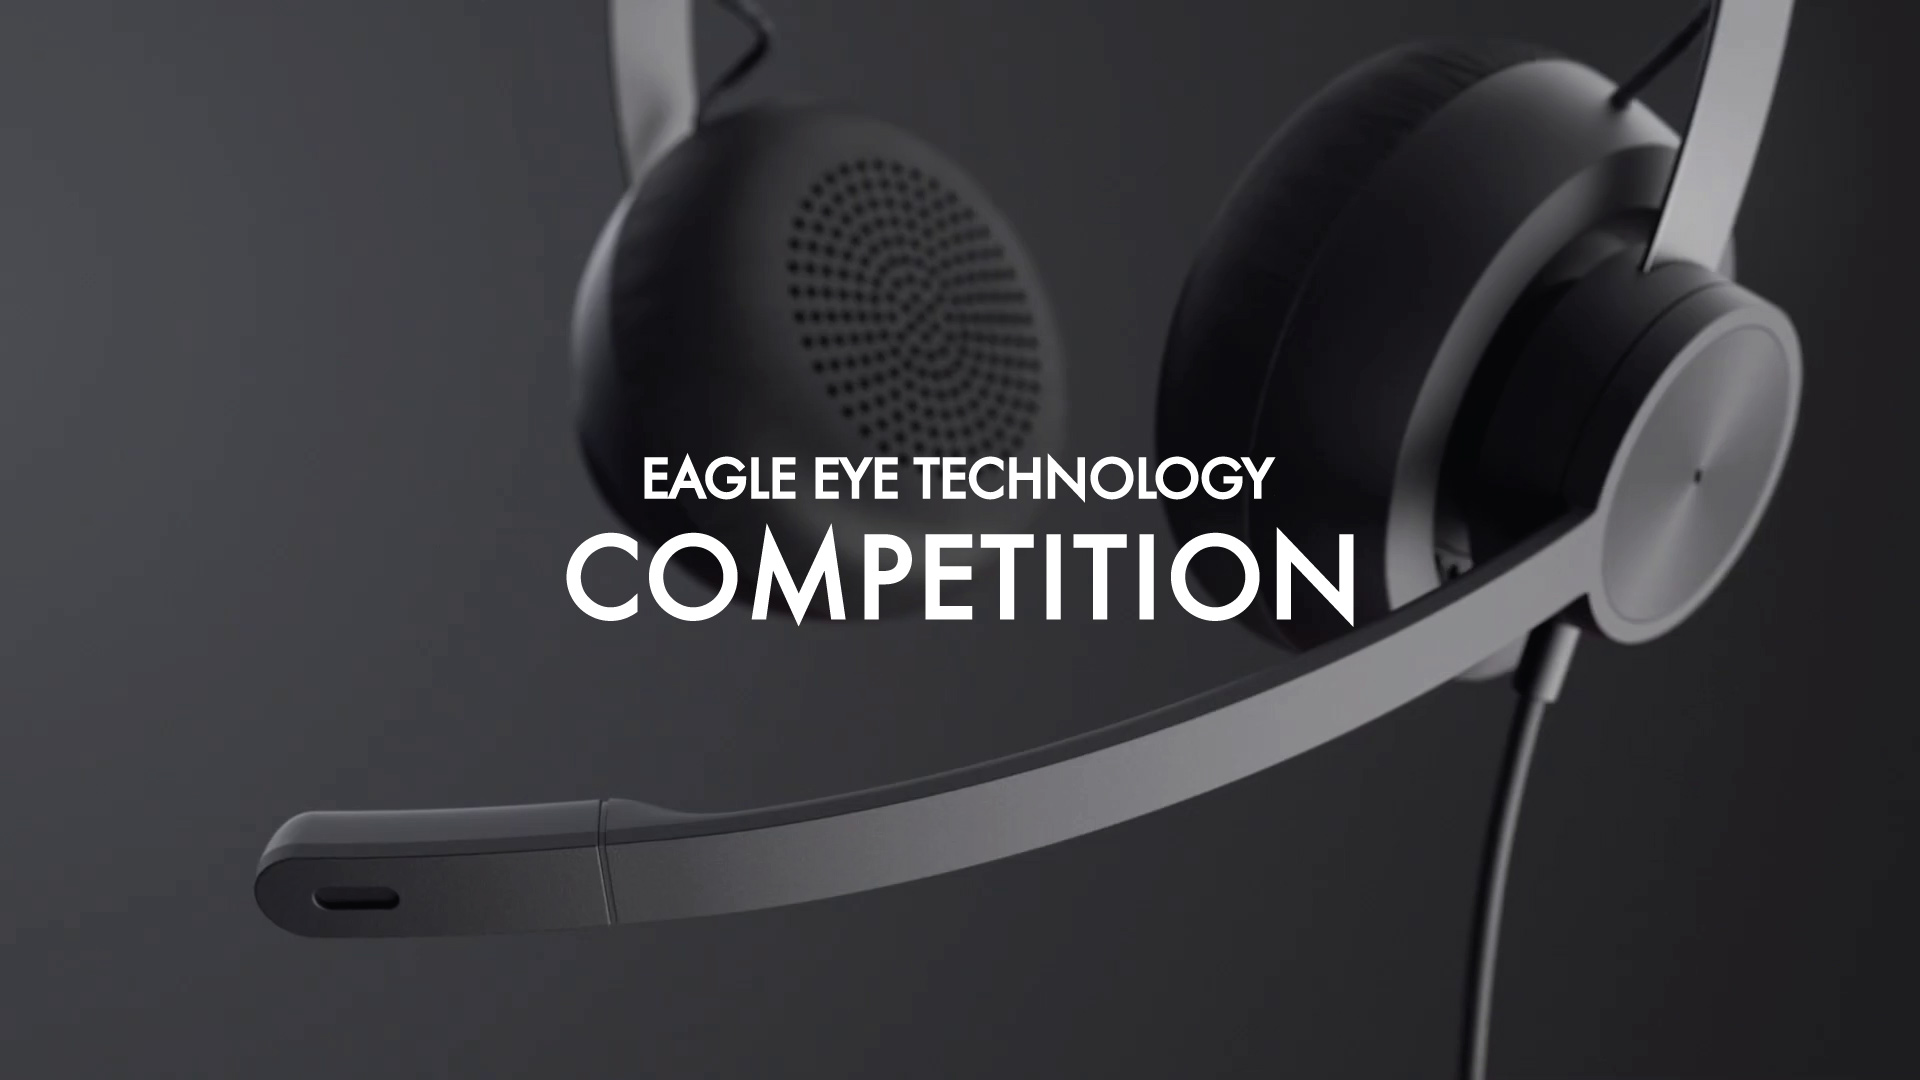 It’s competition week at EagleEye Technology!